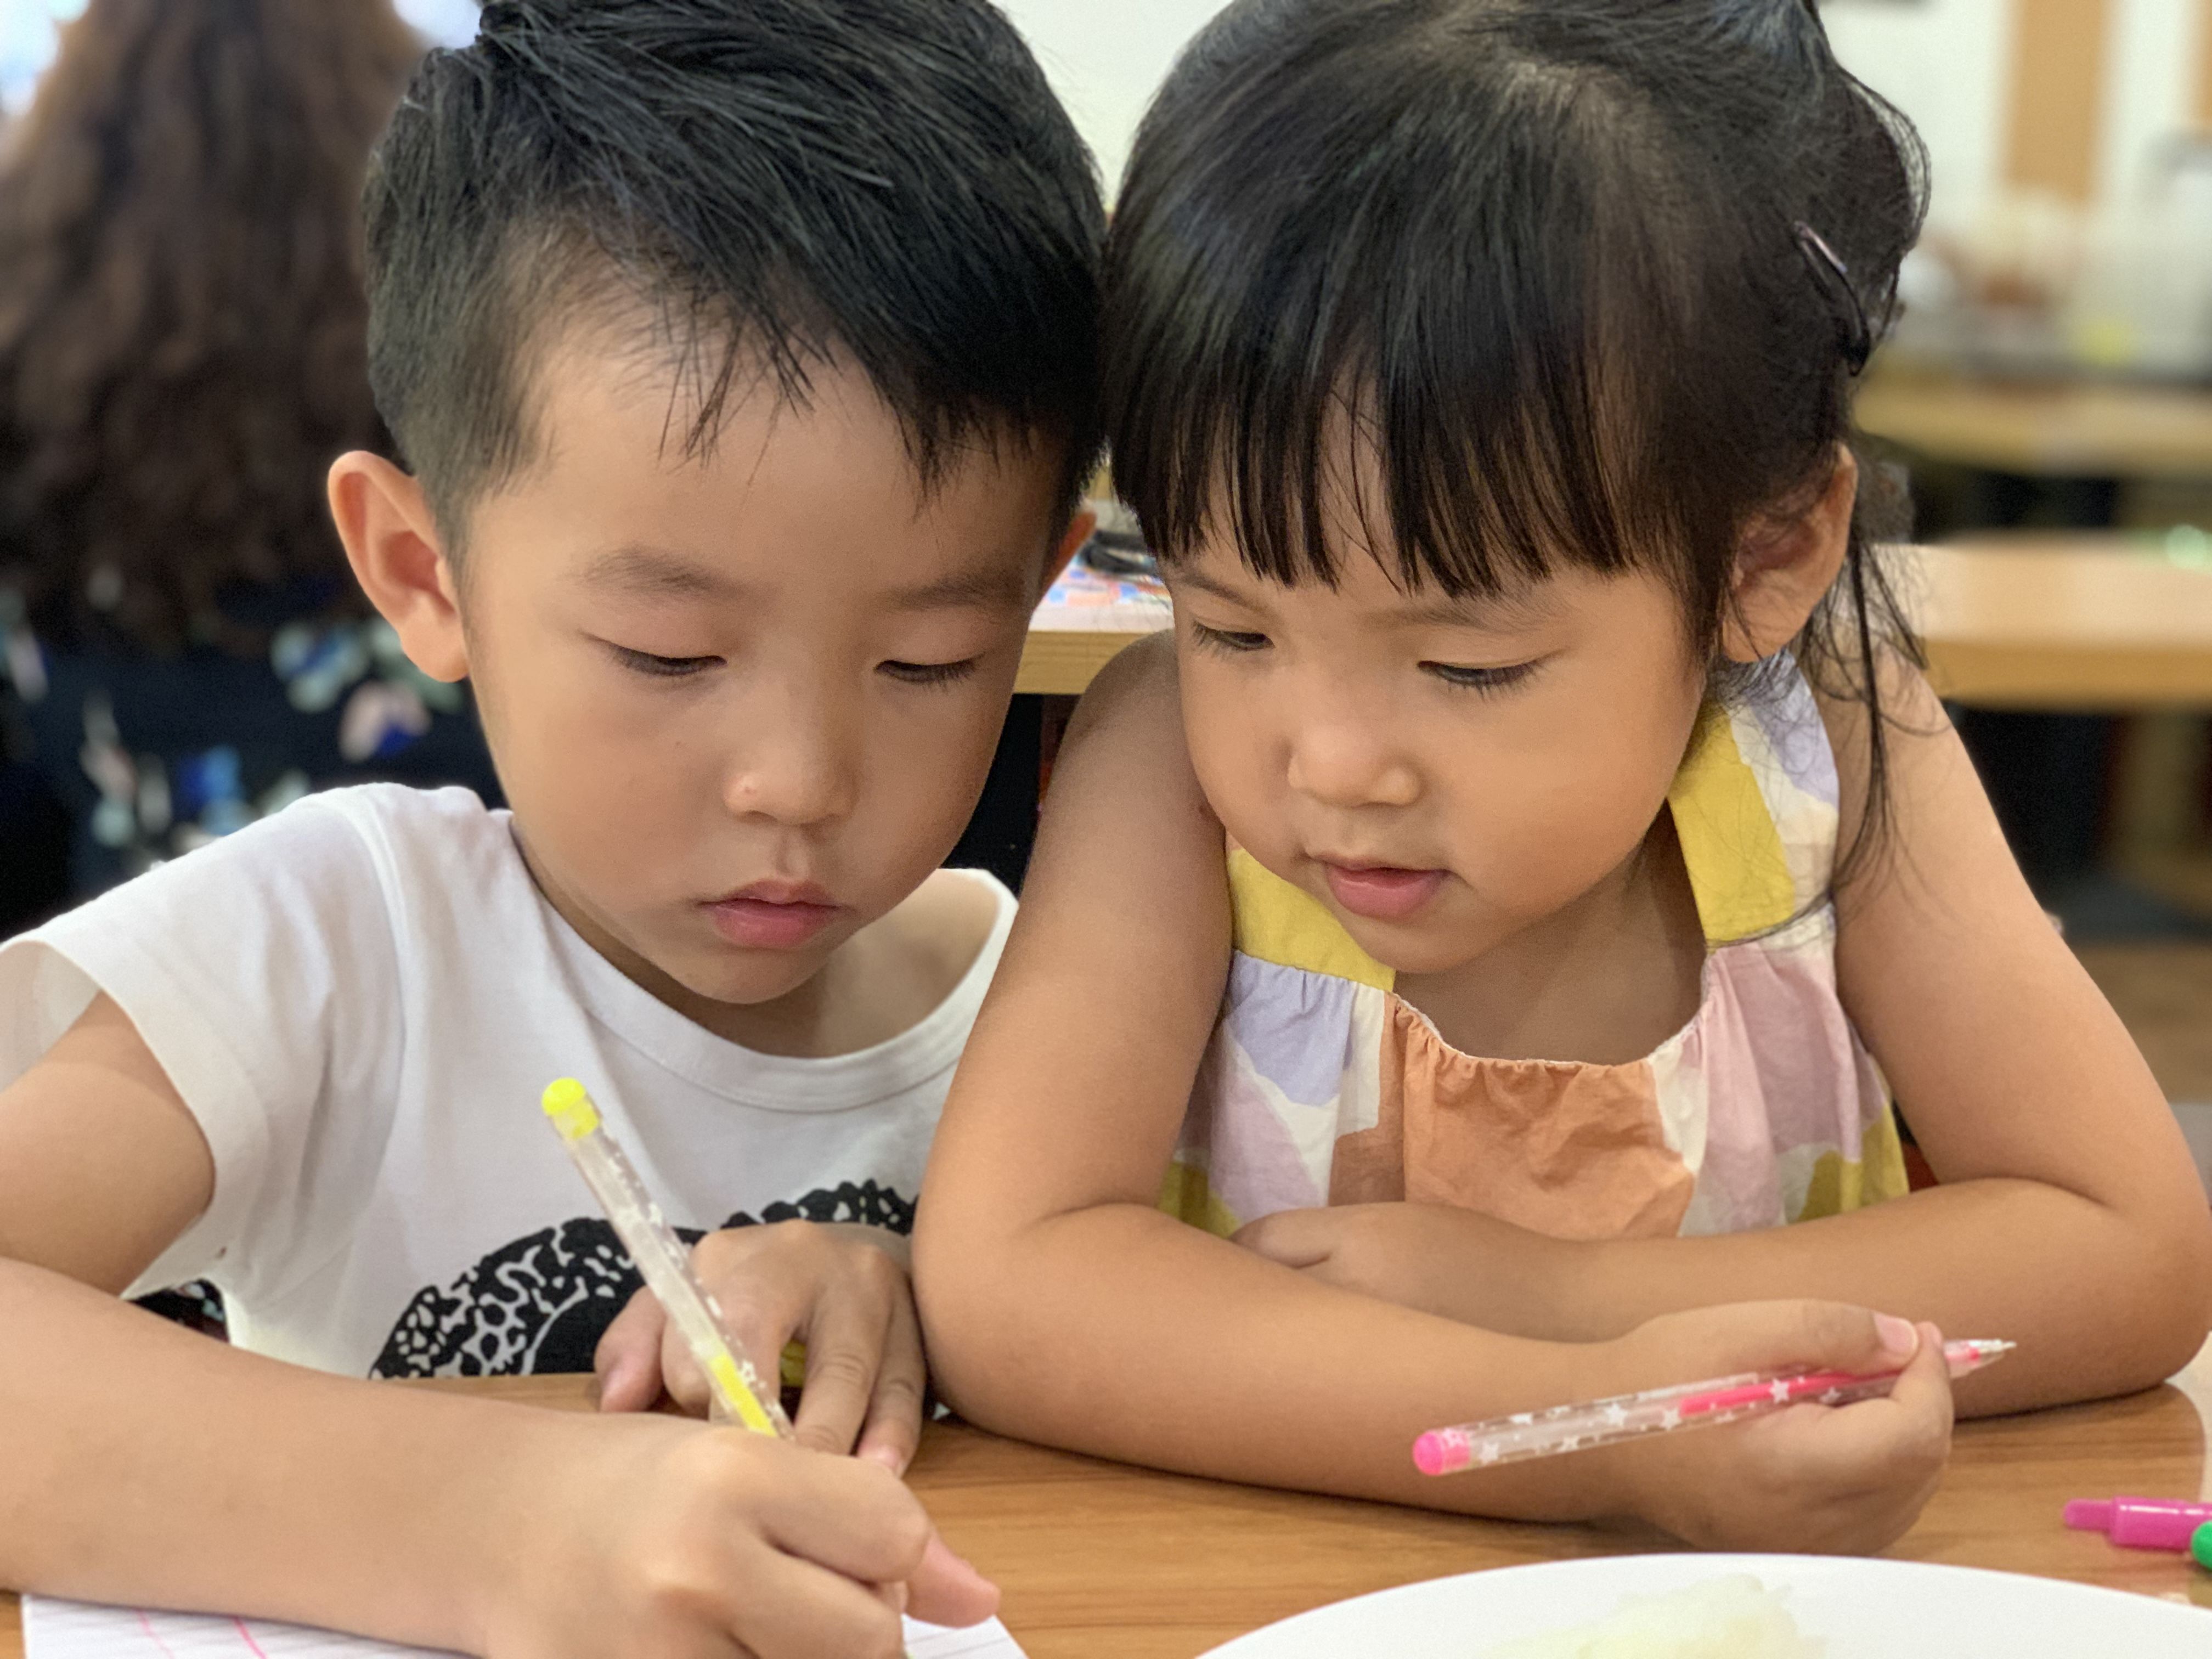 Positive Parenting – 5 ways to connect and improve sibling relationships